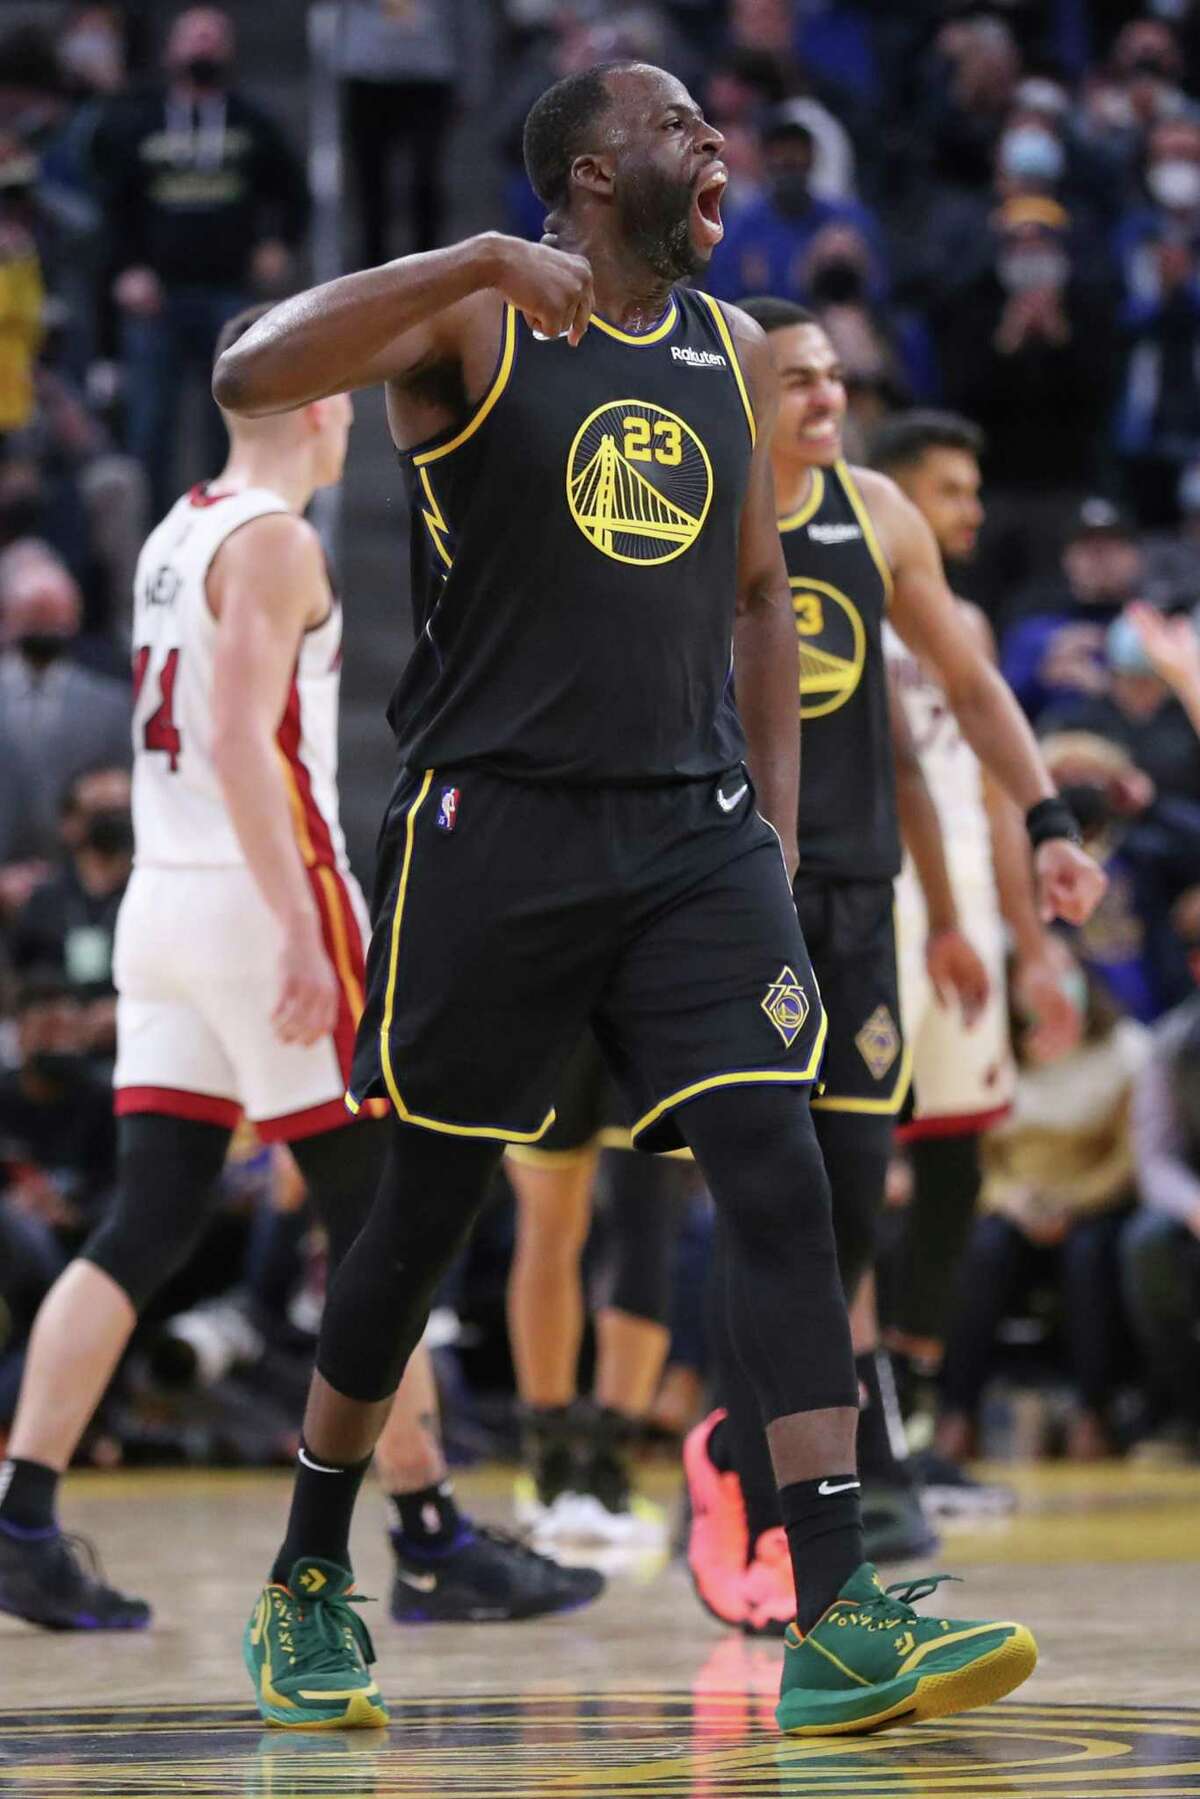 Golden State Warriors' Draymond Green celebrates a Jordan Poole dunk in 4th quarter during Warriors' 115-108 win over Miami Heat in NBA game at Chase Center in San Francisco, Calif., on Monday, January 3, 2022.